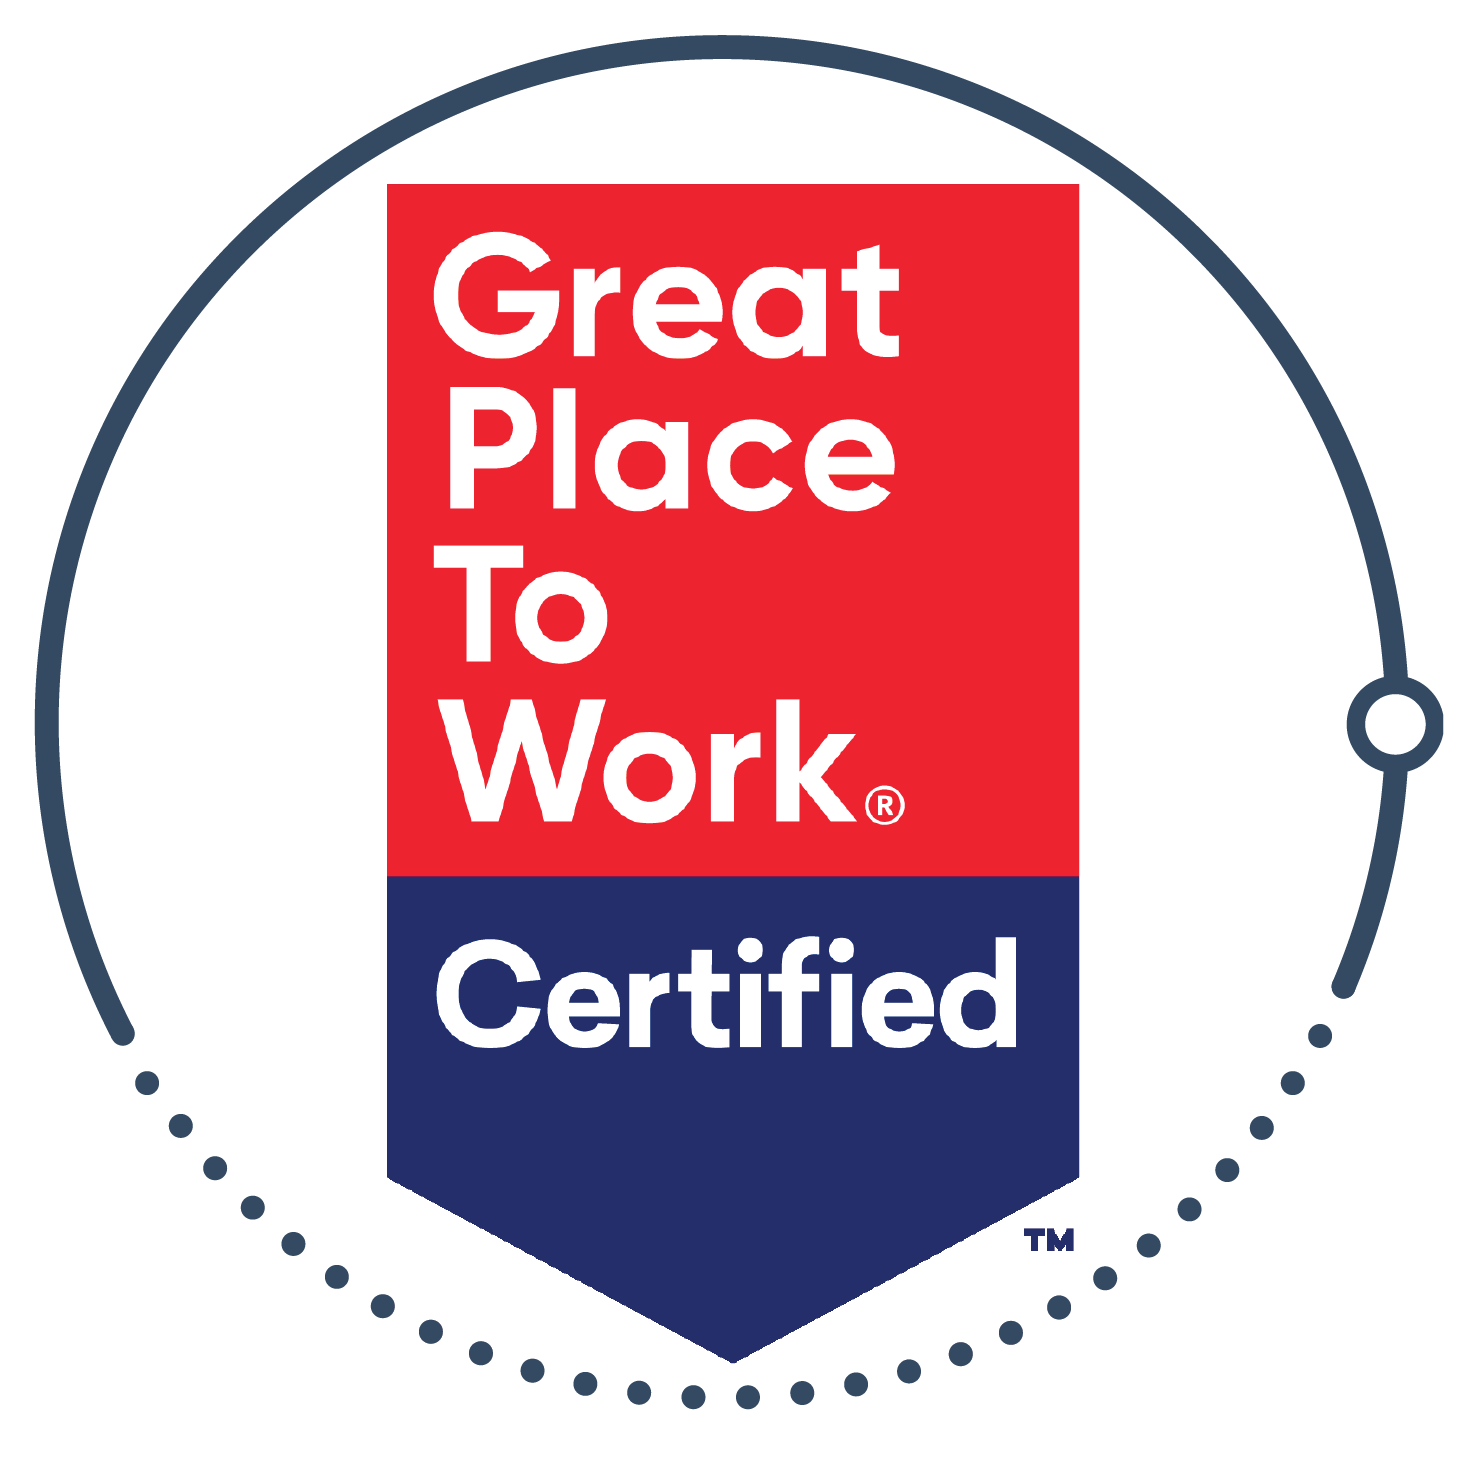 2022 Great Place to Work Certified